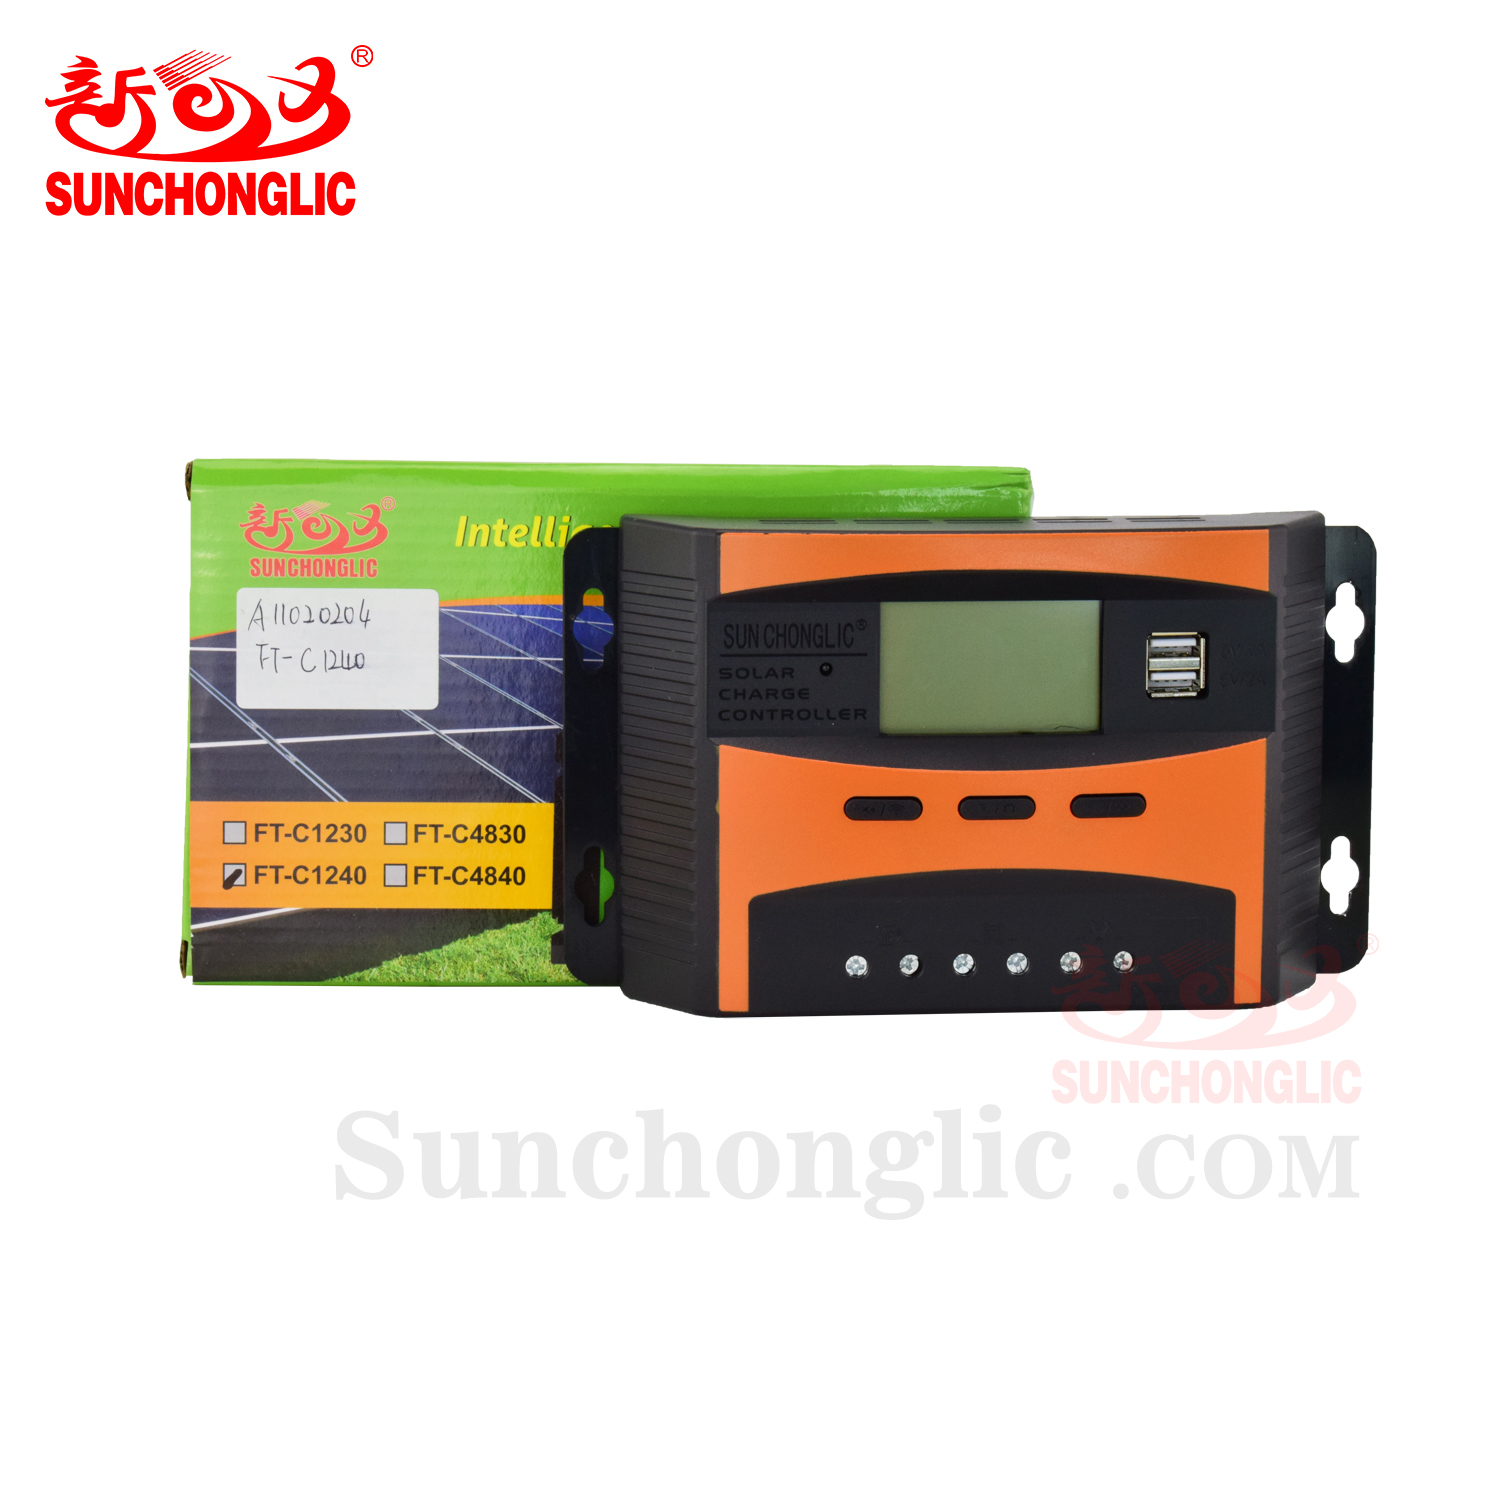 PWM Solar Charge Controller - FT-C1240